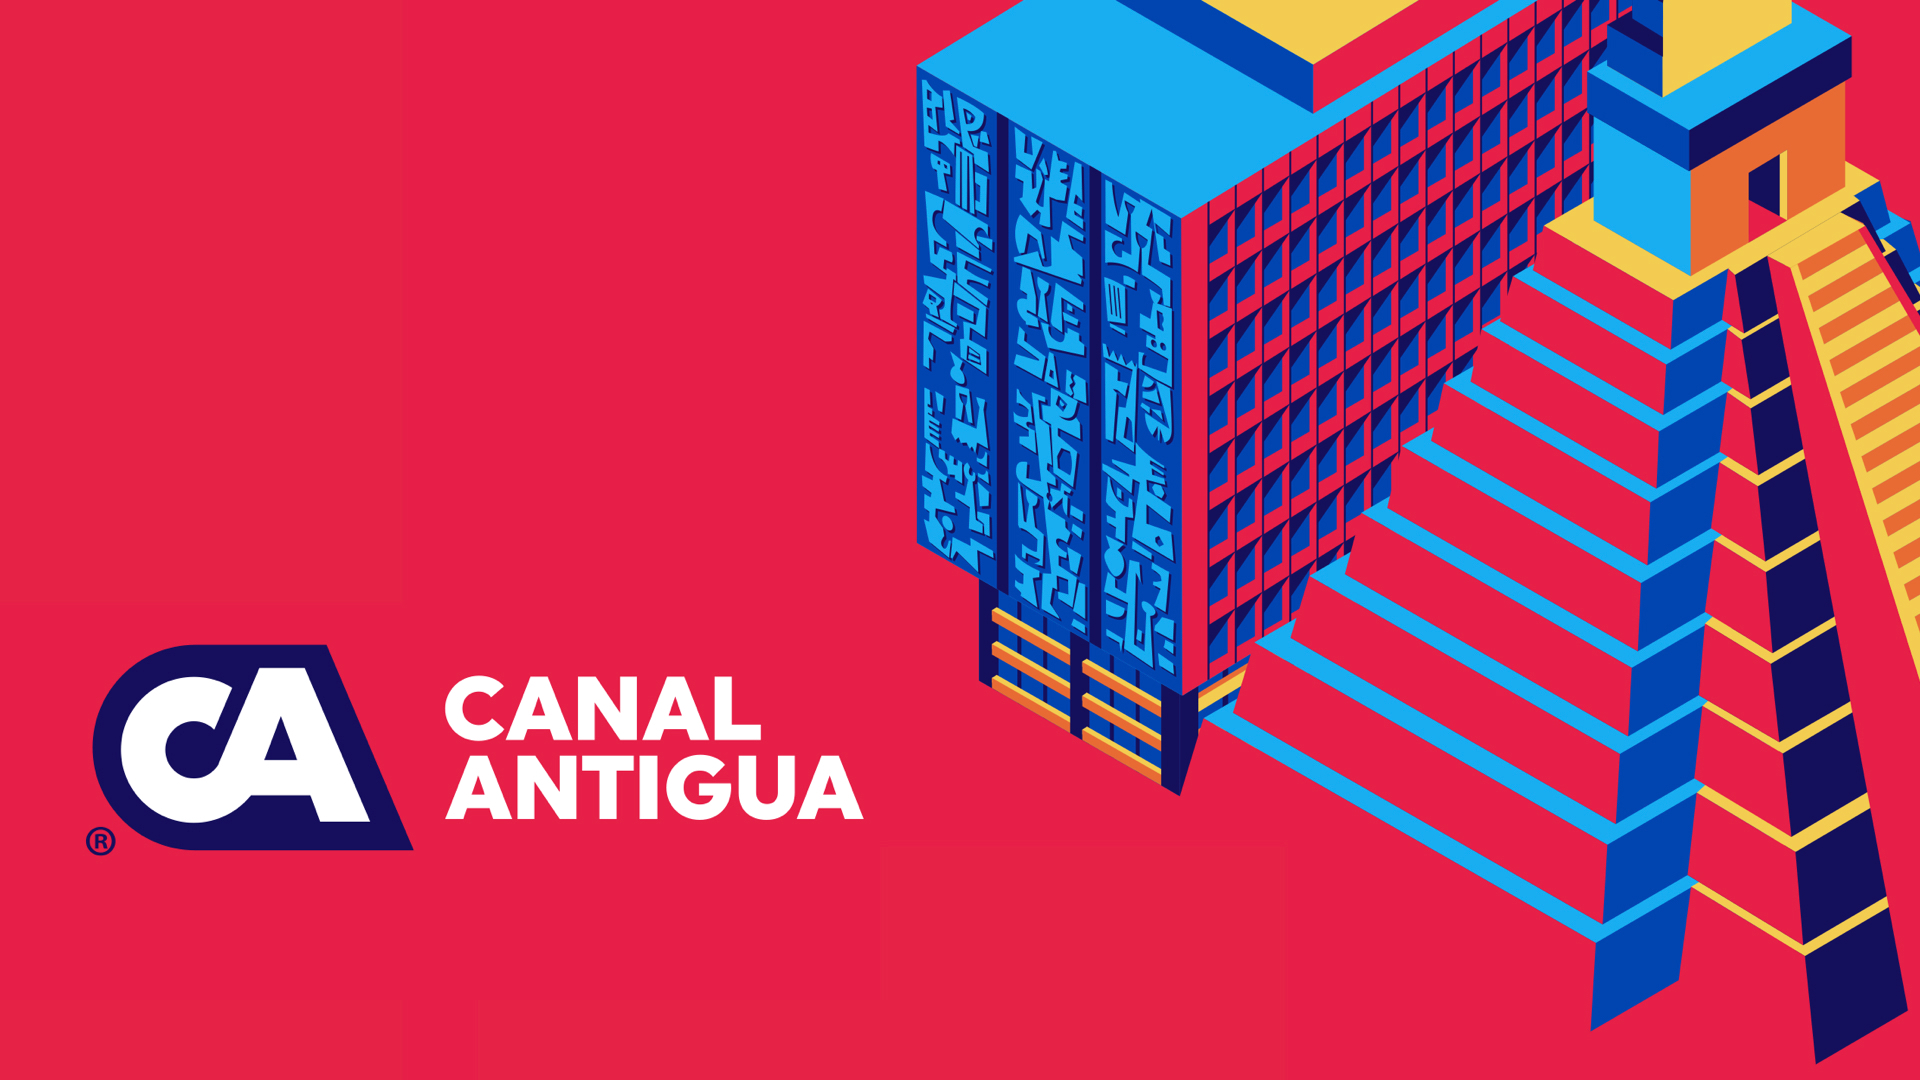 ver canal antigua online betting